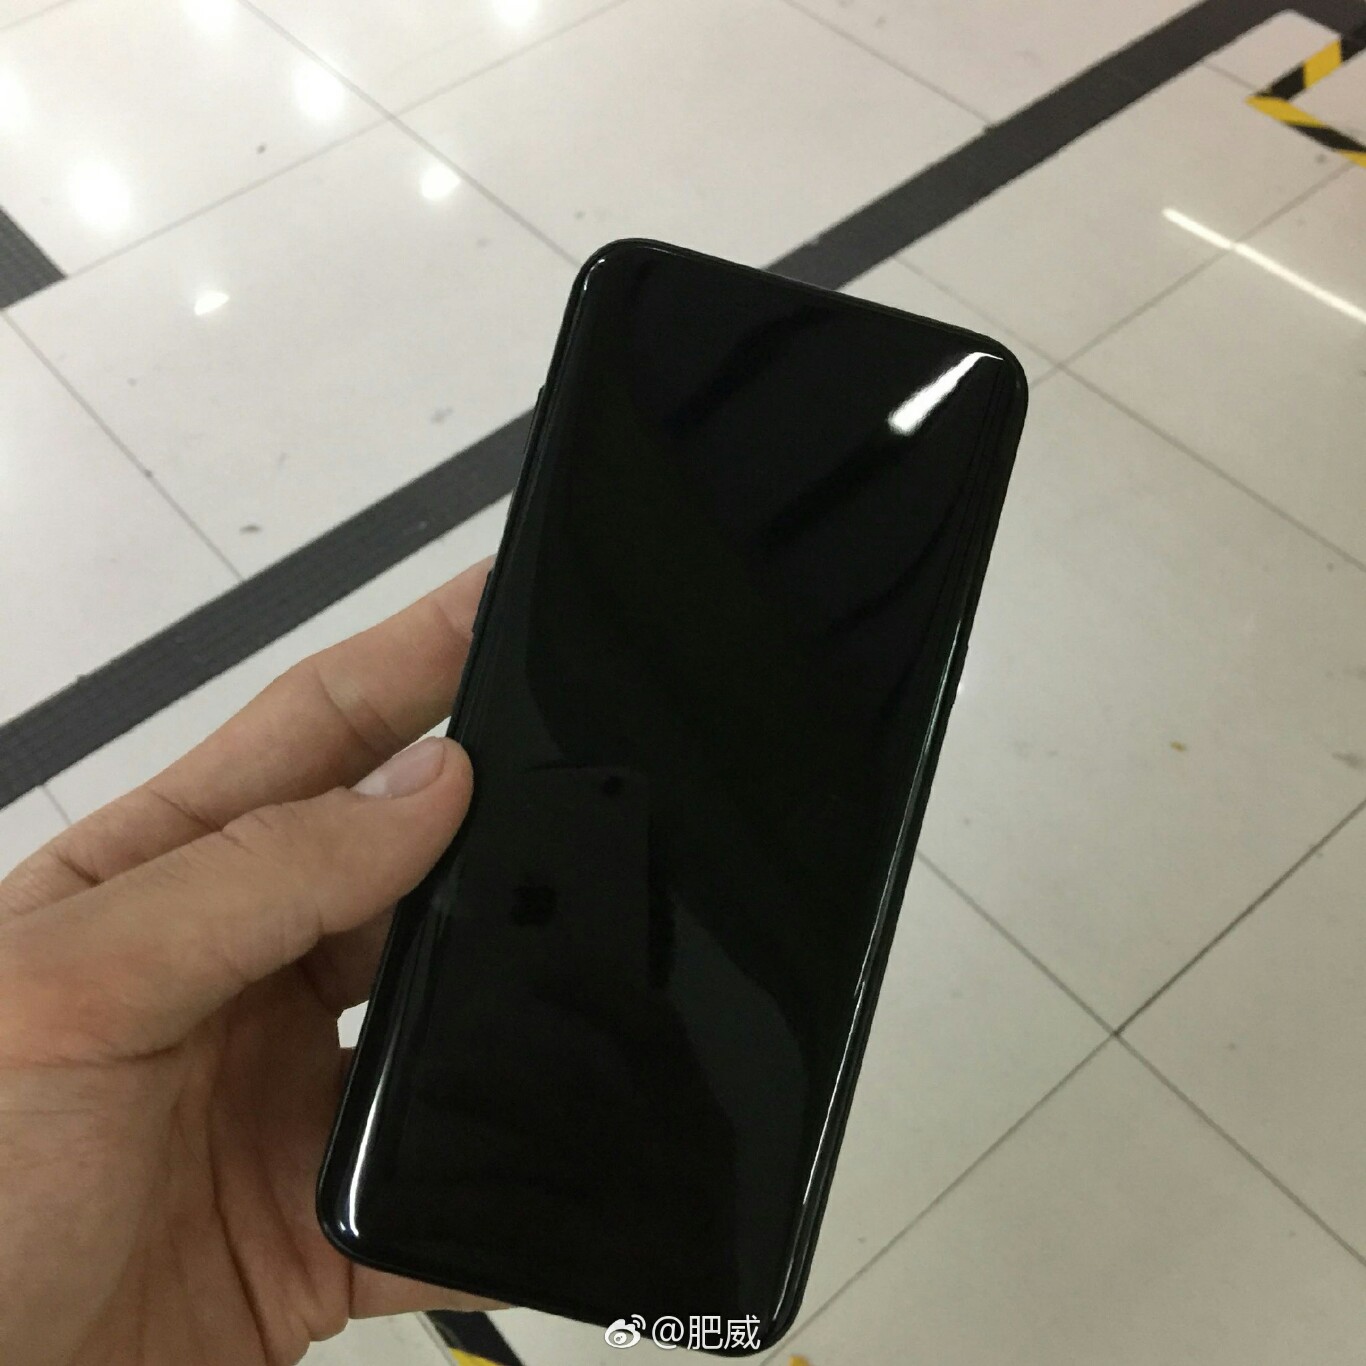 Black color Galaxy S8 leaks in new pics 7